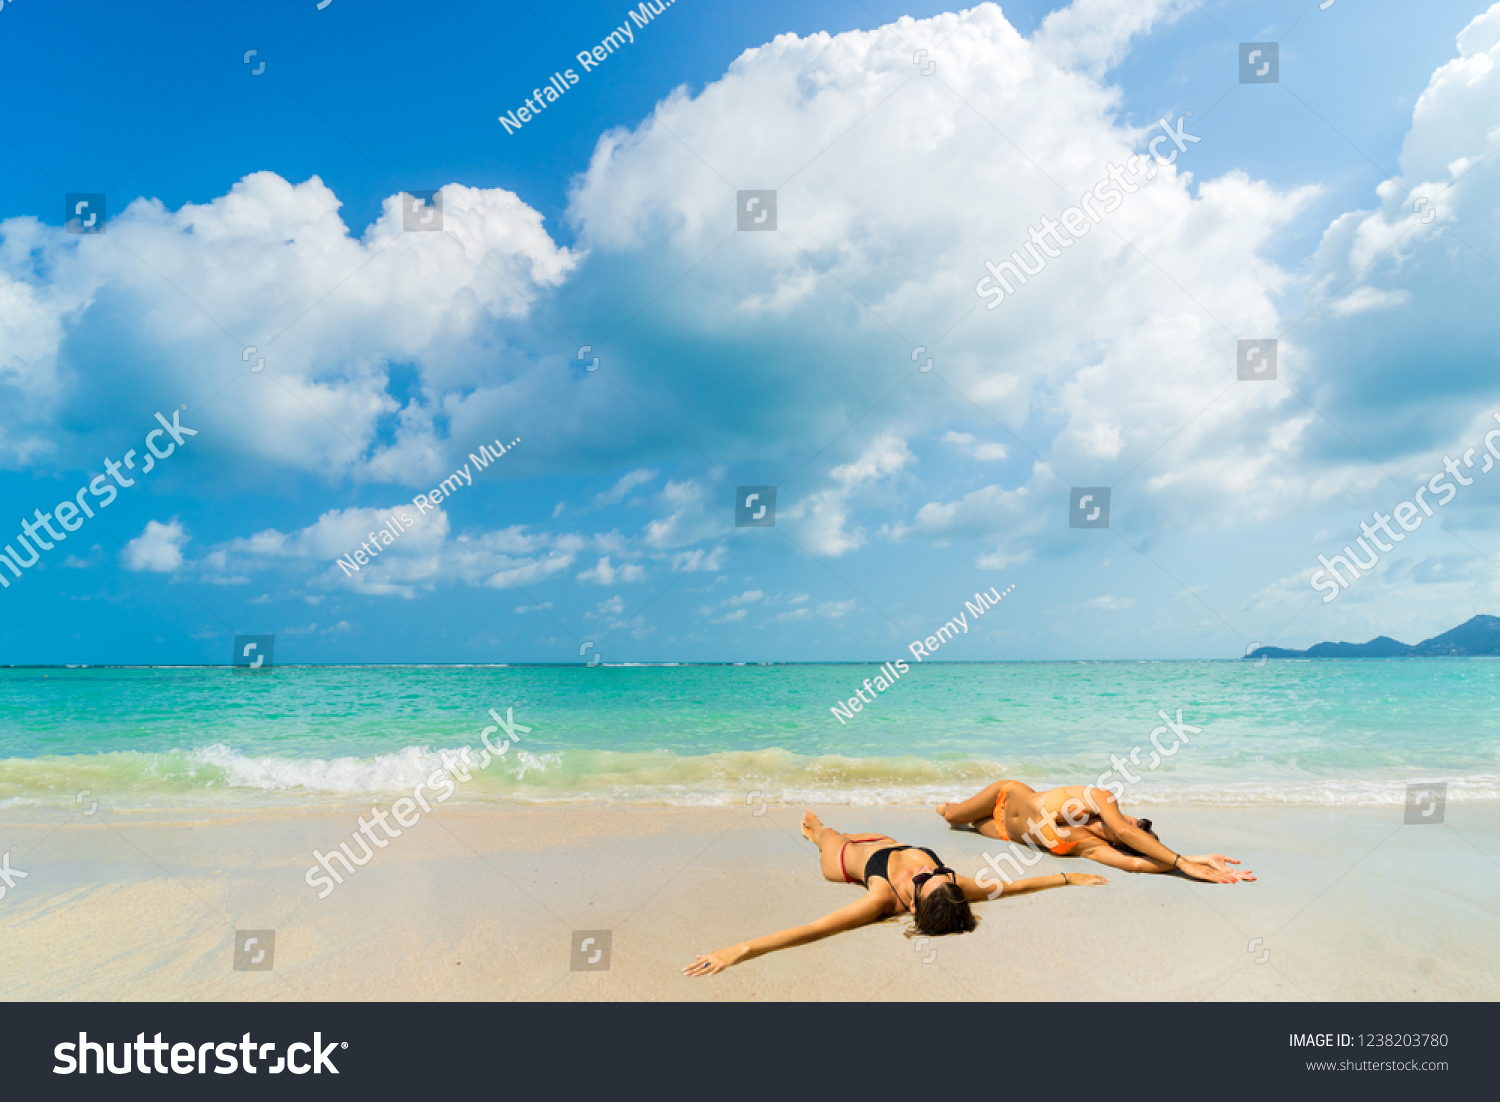 Woman suntanning - Winter holidays at the tropical beach #1238203780